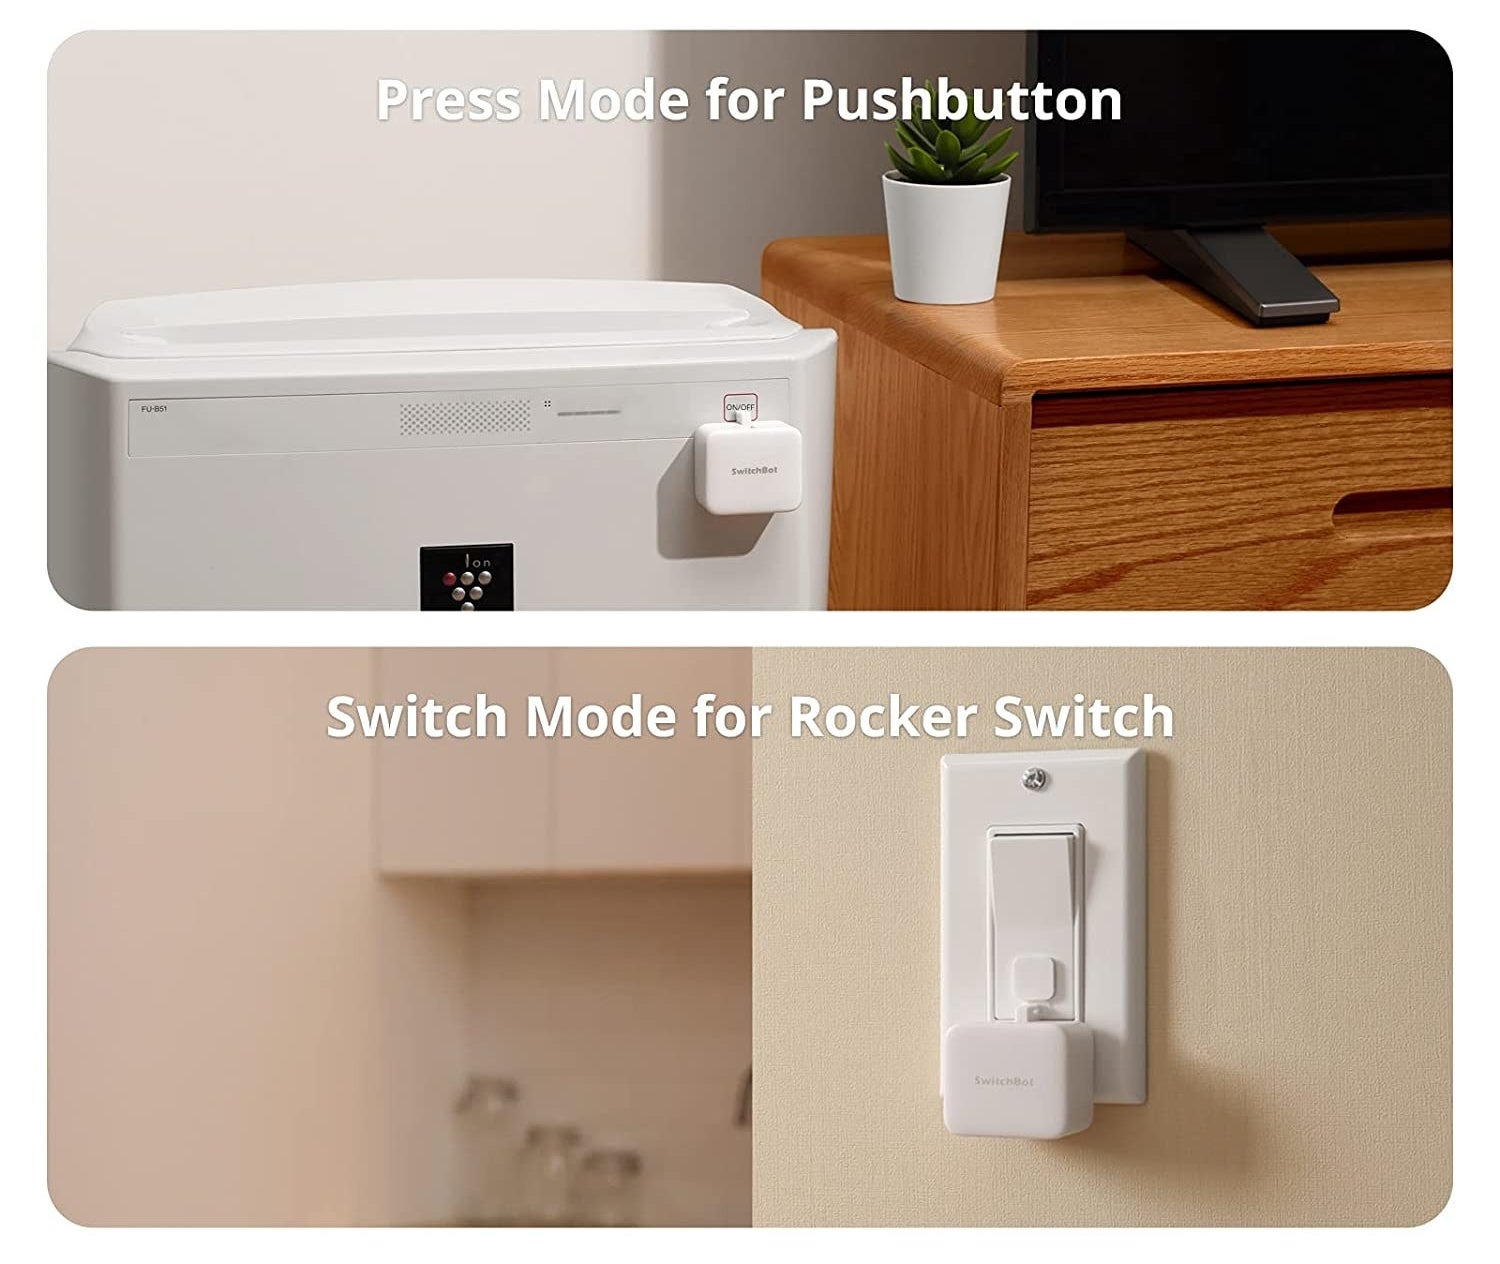 the two ways the switch robot can work: press mode for pushbutton and switch mode for rocker switches